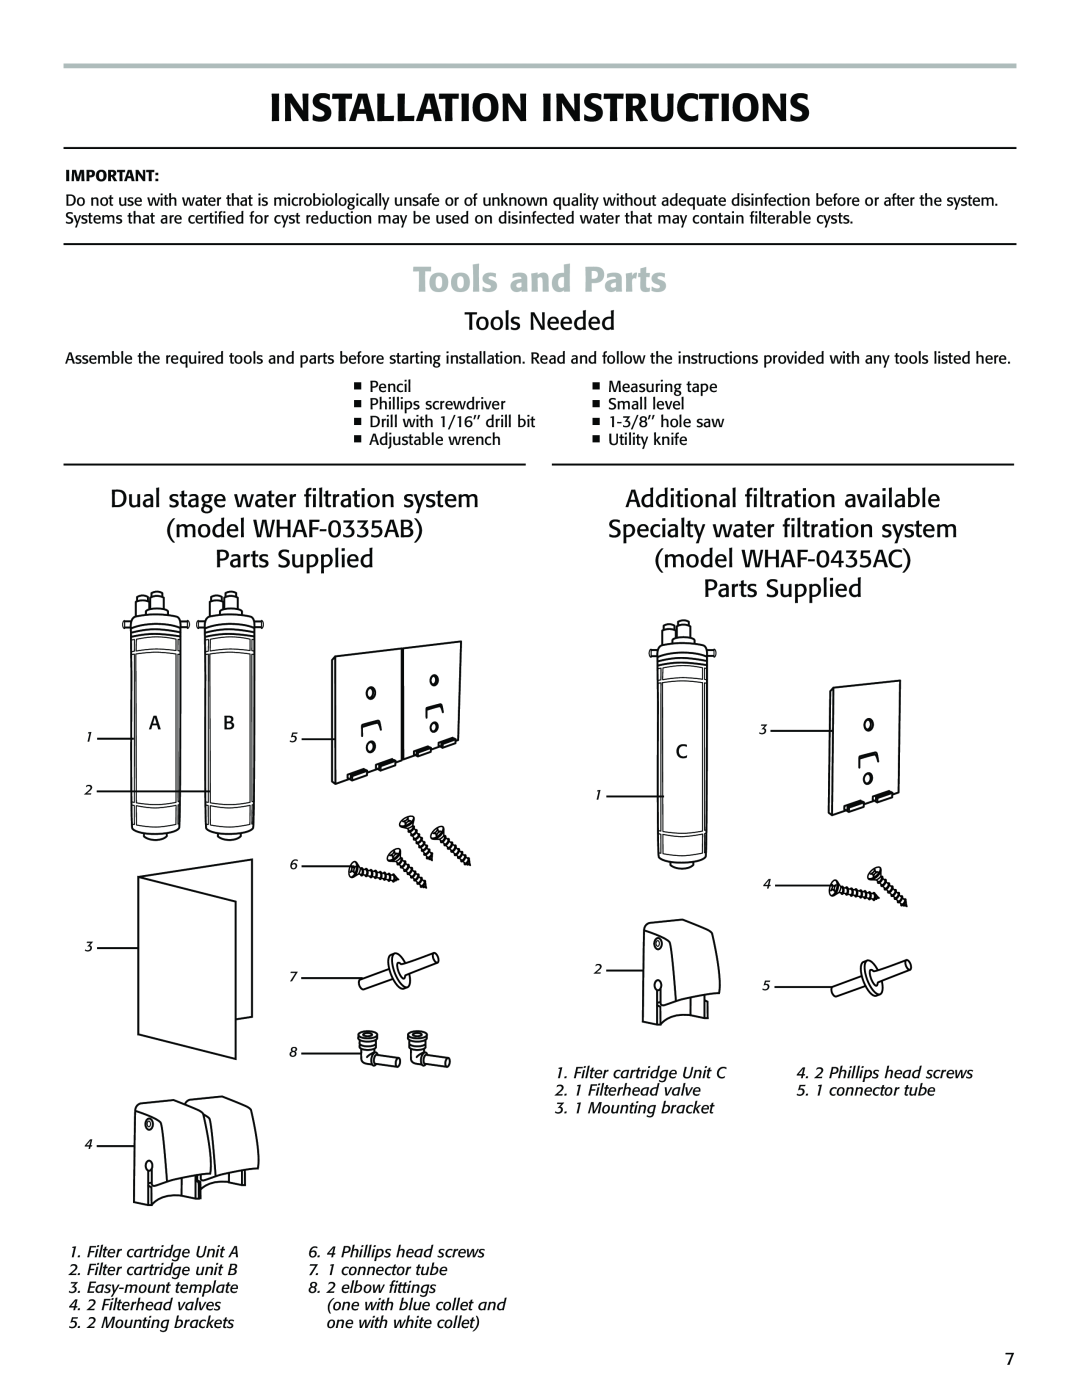 Whirlpool WHAB-6013 Installation Instructions, Tools and Parts, Tools Needed, Dual stage water filtration system 